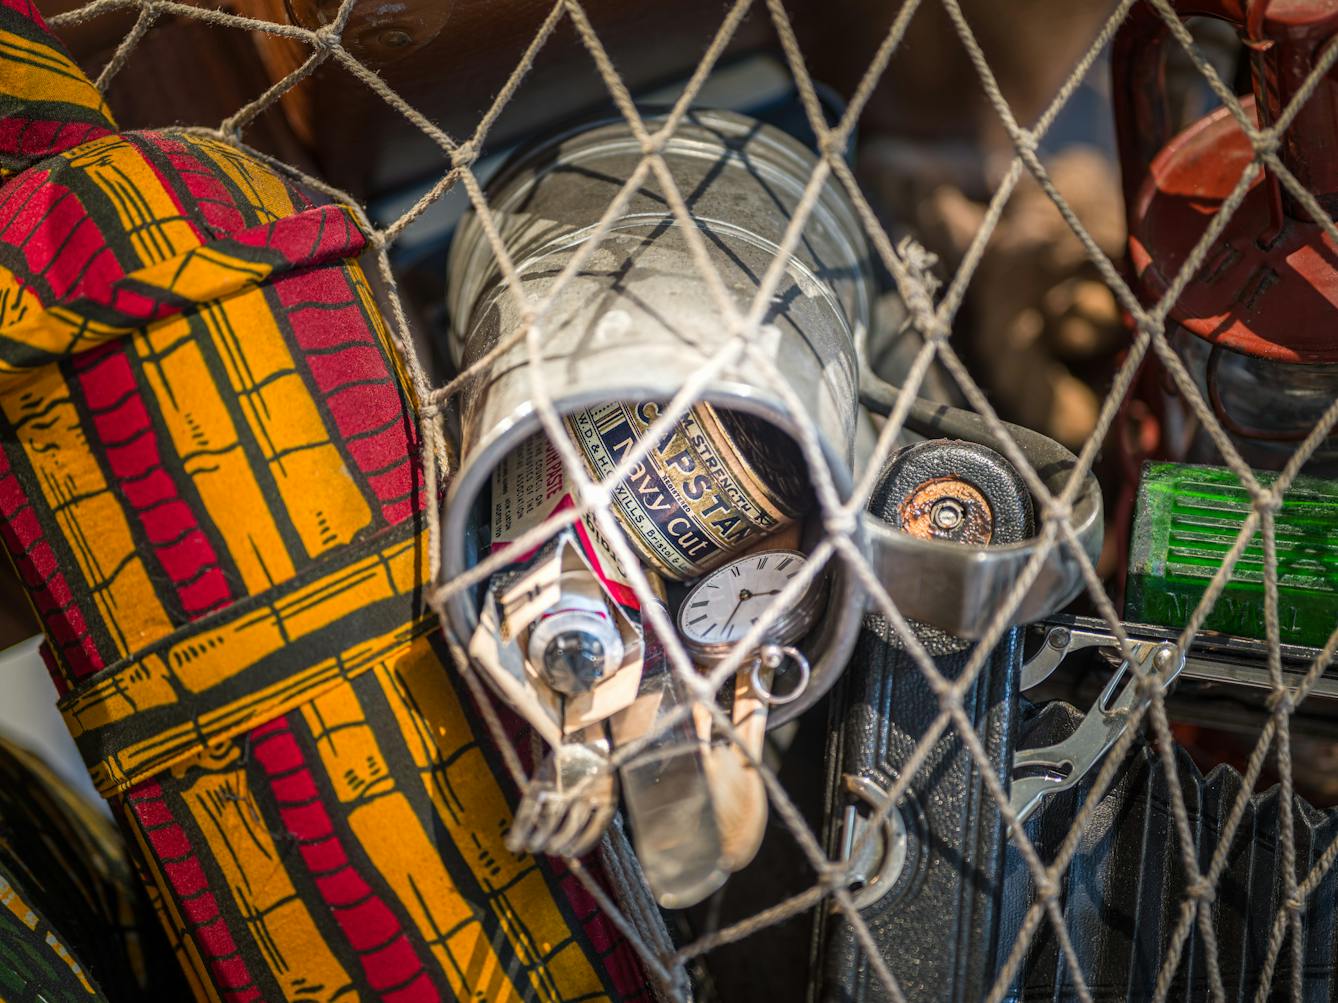 Photograph of a close-up detail of the net being carried by a life-size artwork of a figure resembling an astronaut. Within the net is a collection of objects, including a pocket watch, a camera, a knife and fork and a tin of tobacco.